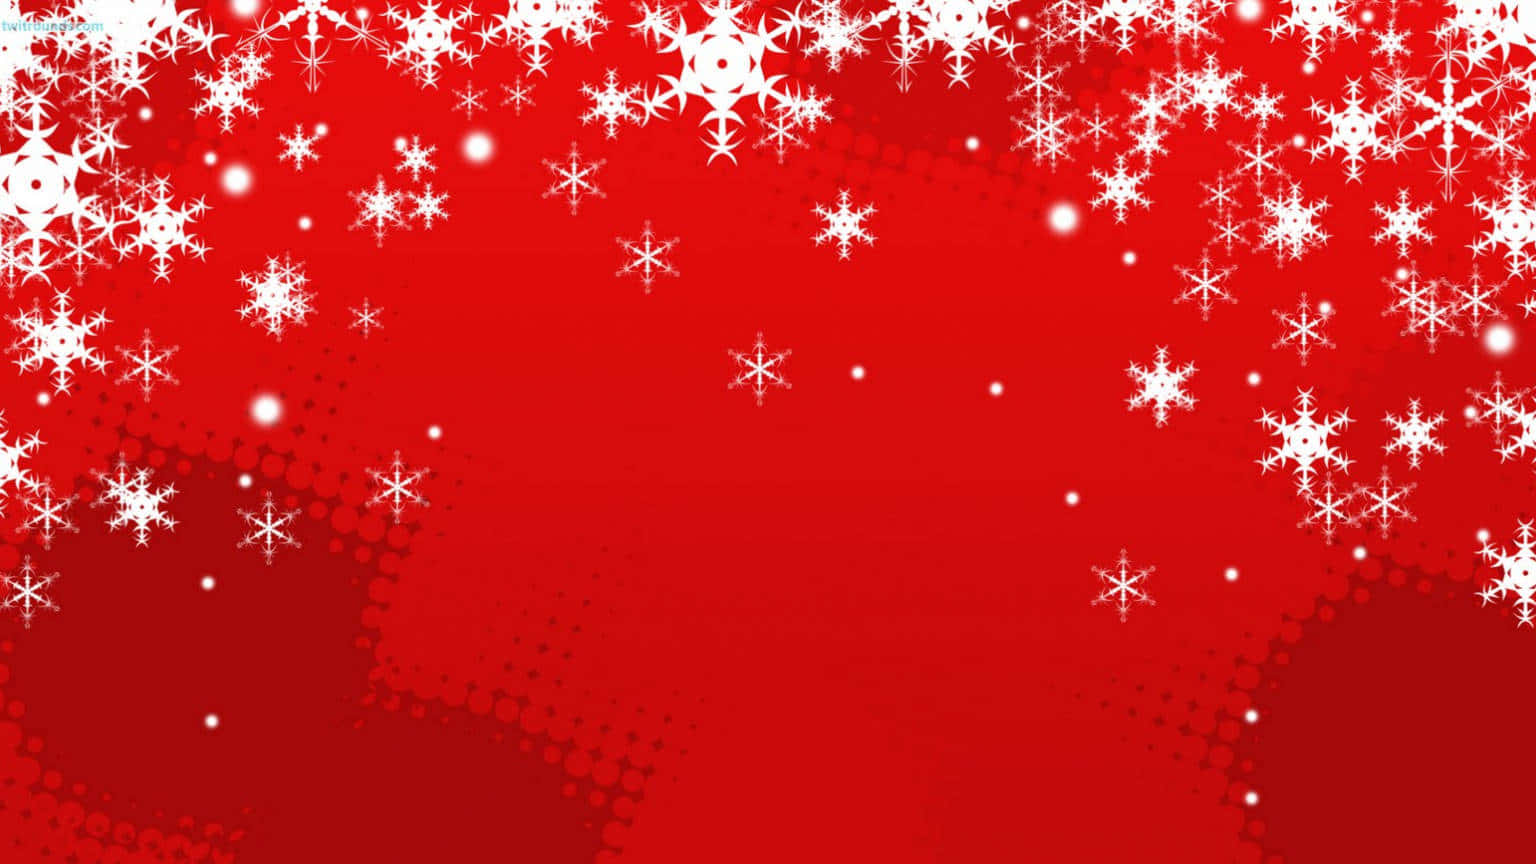 Red and Festive: Celebrate the Holidays with This Christmas Red Background!